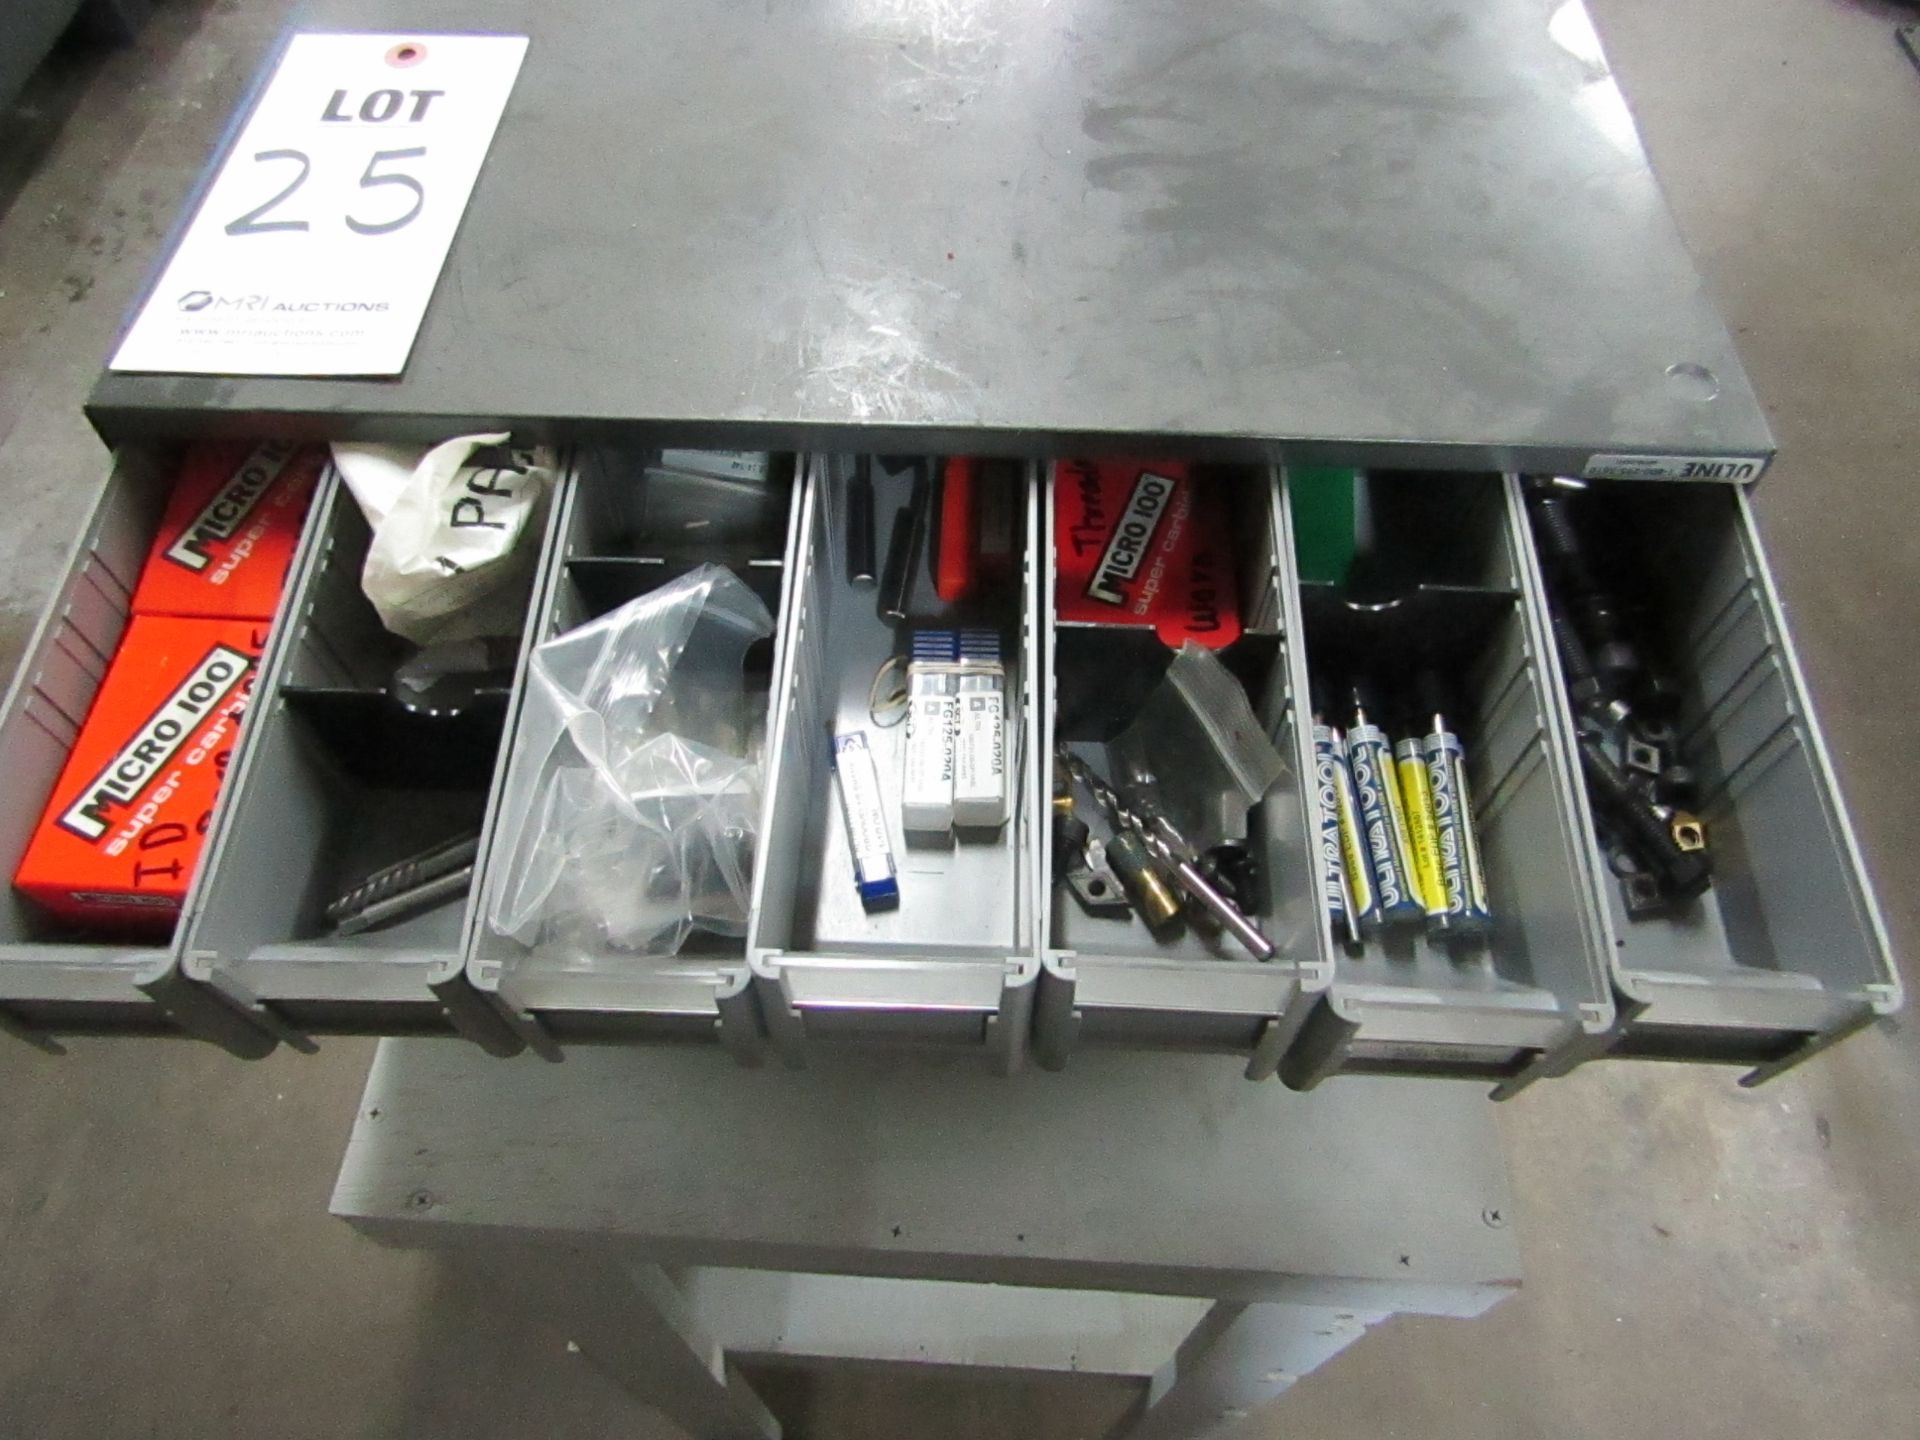 TOOL ORGANIZER TO INCLUDE BUT NOT LIMITED TO: CARBIDE TOOLING, DRILL BITS, END MILLS, AND HARDWARE - Image 2 of 9